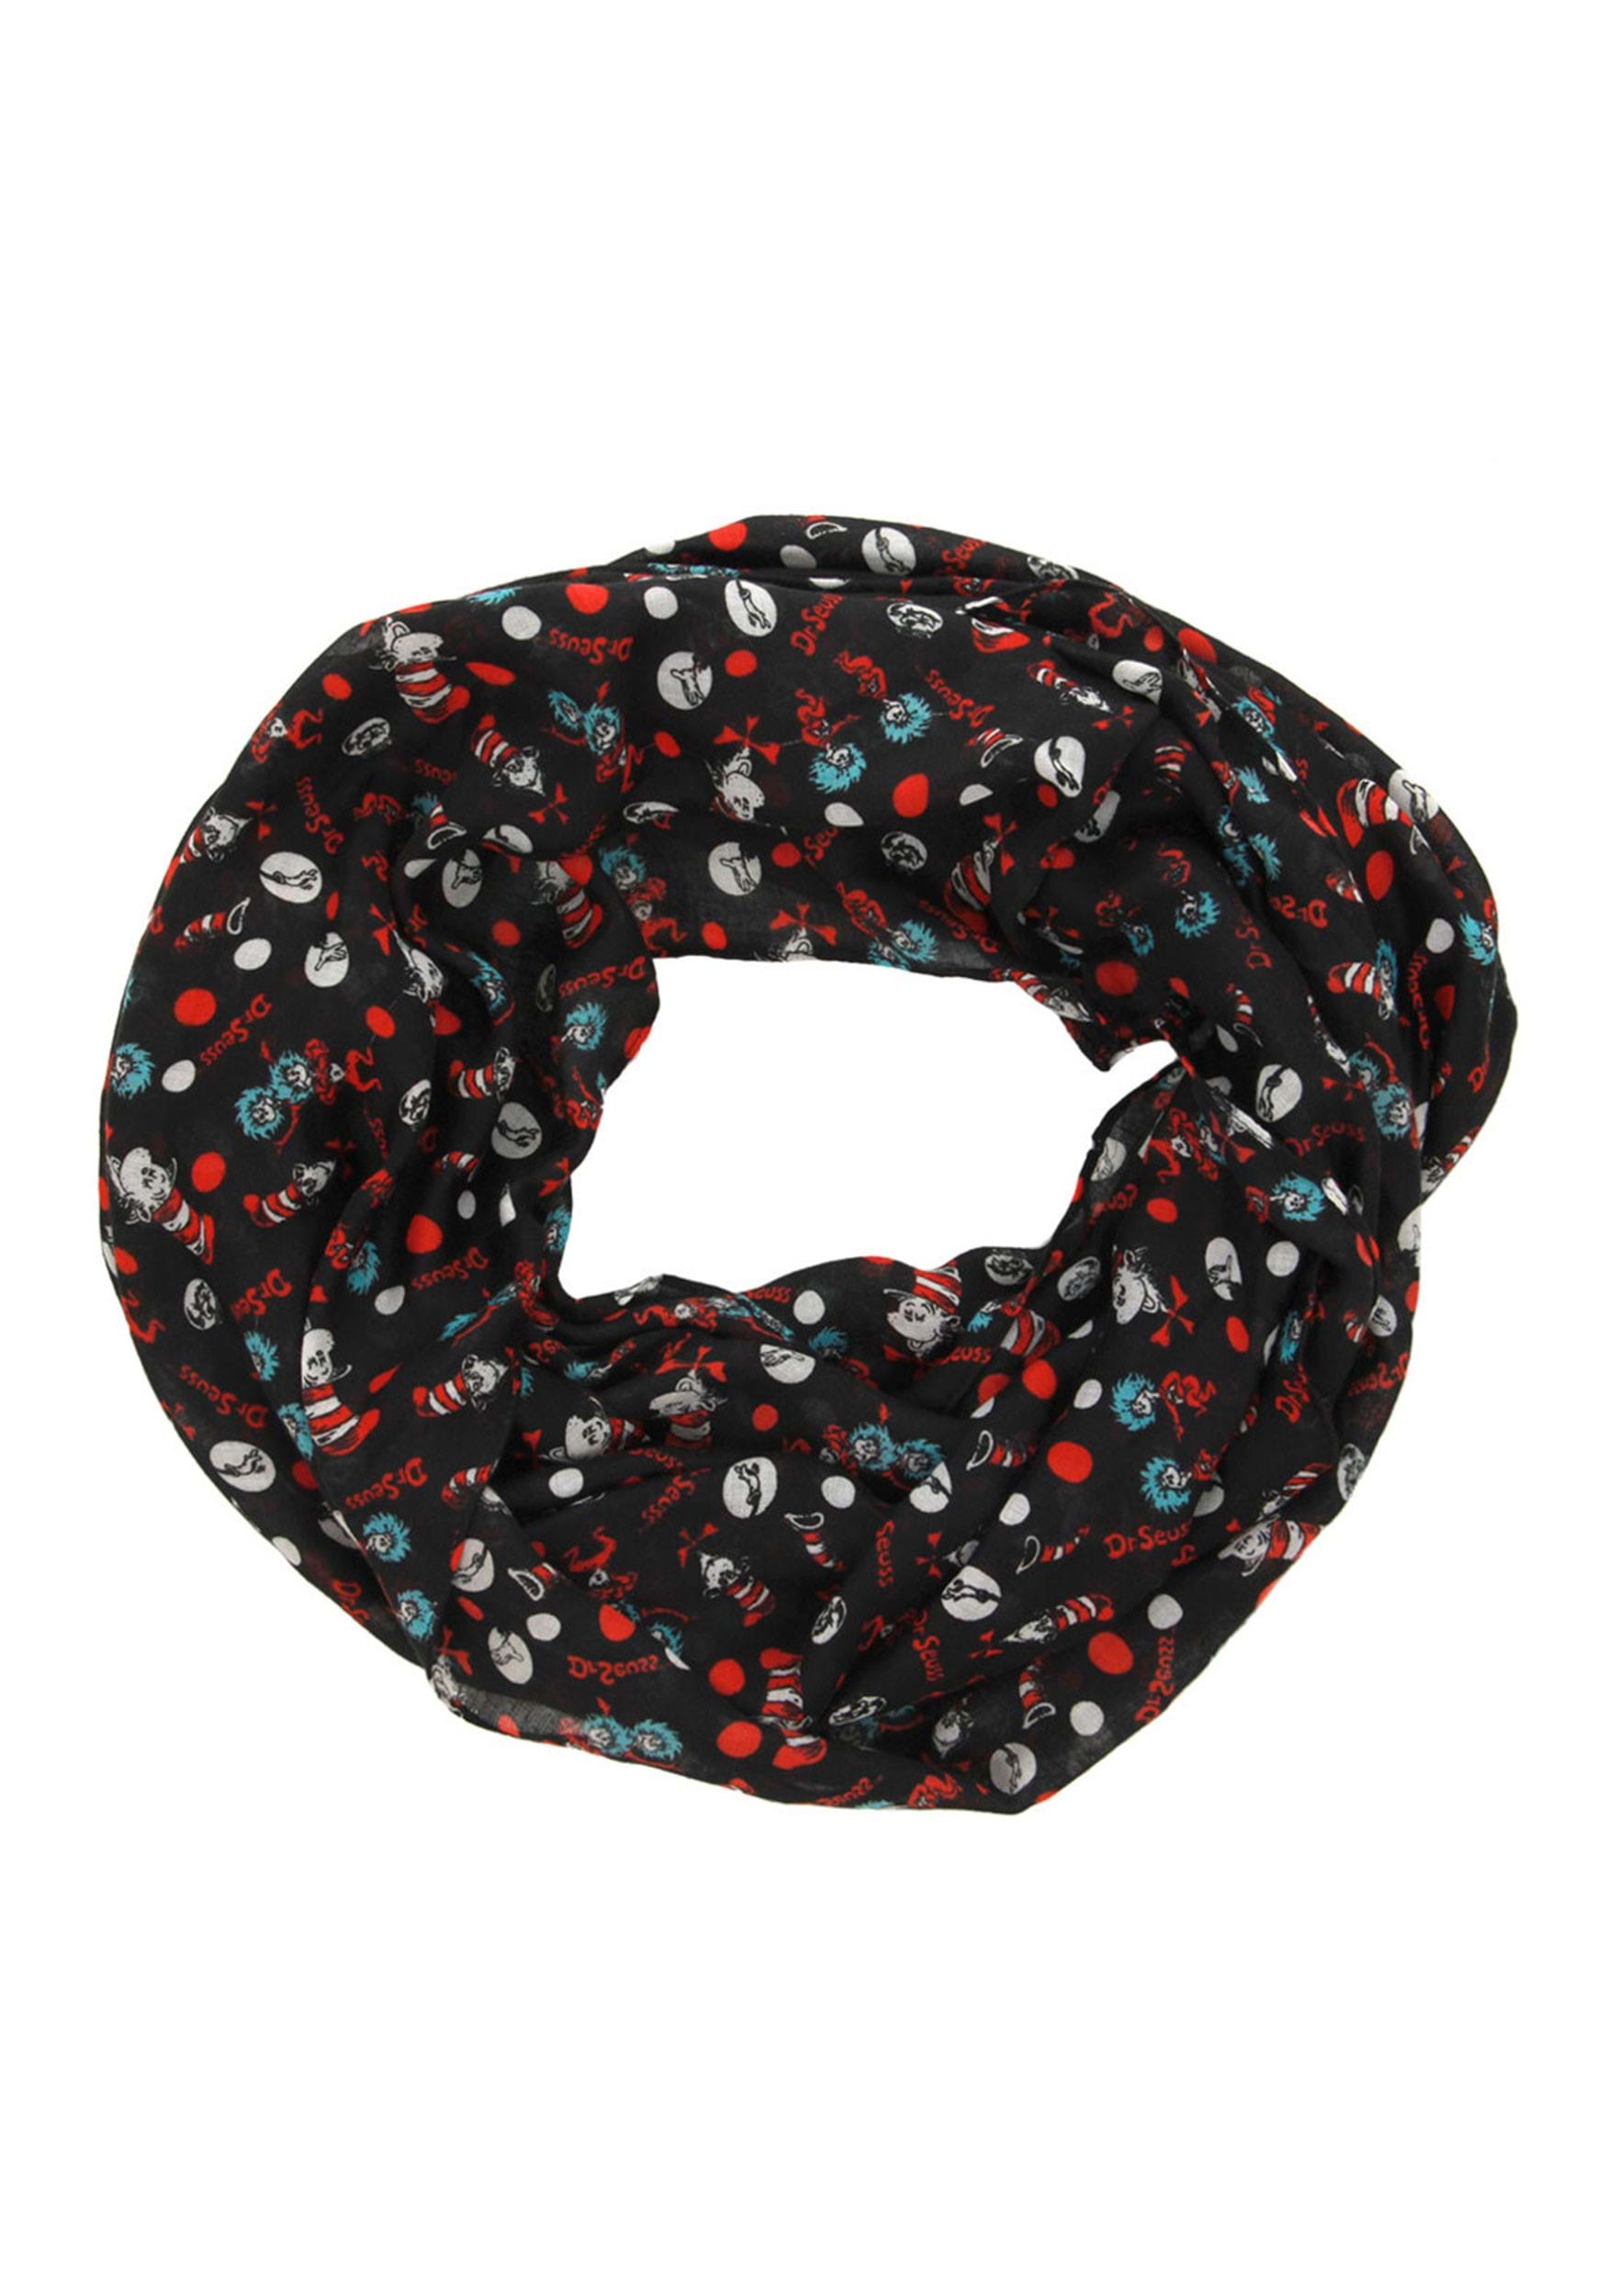 The Cat In The Hat Lightweight Women's Infinity Scarf